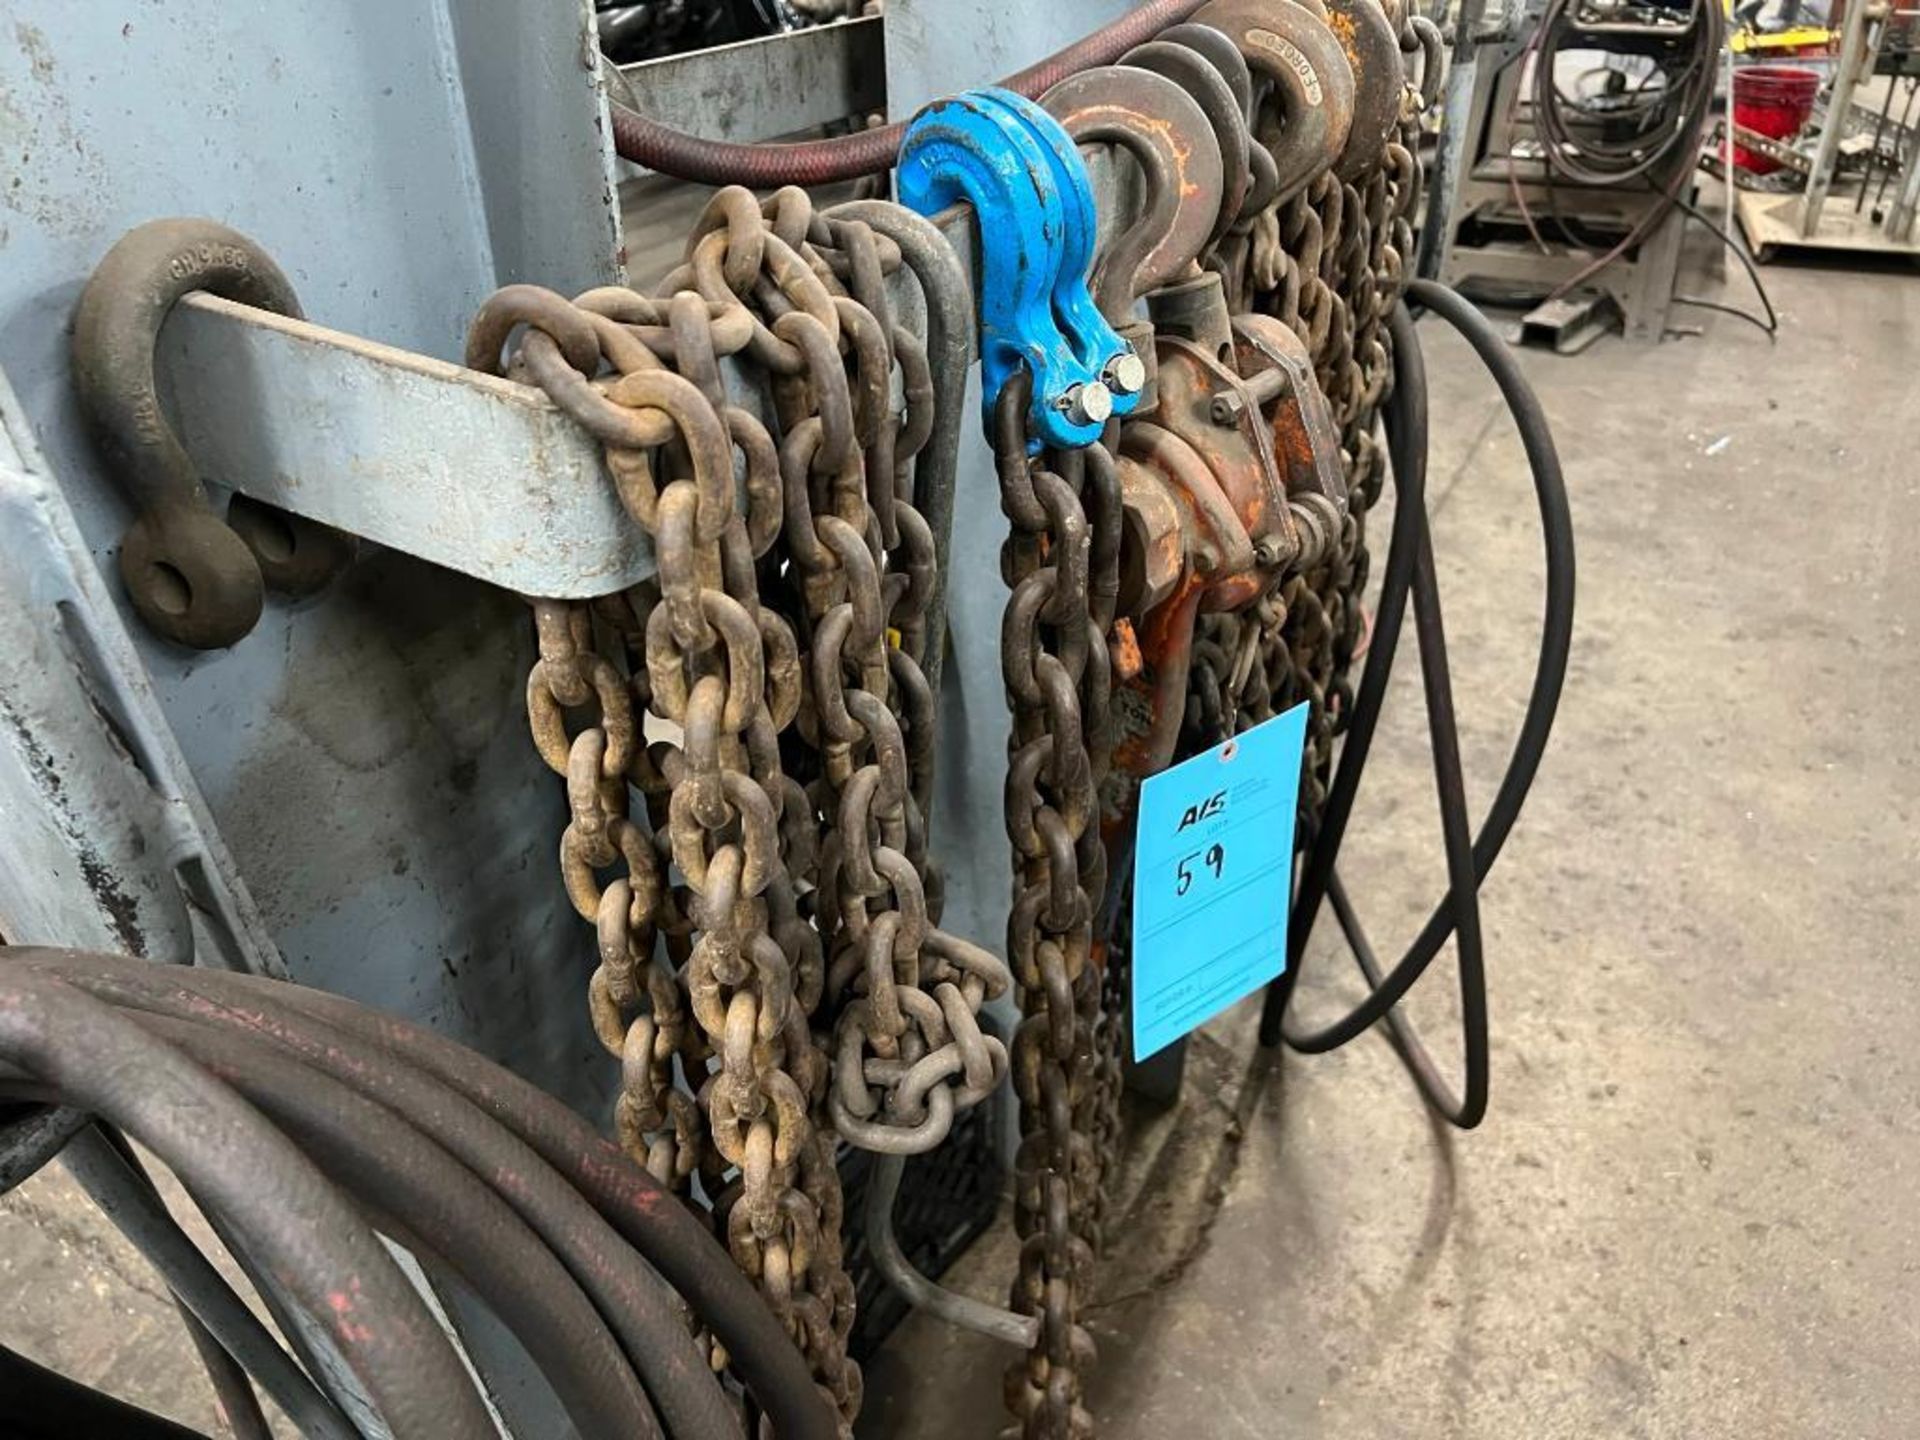 Lot of Miscellaneous Chains - Image 4 of 4